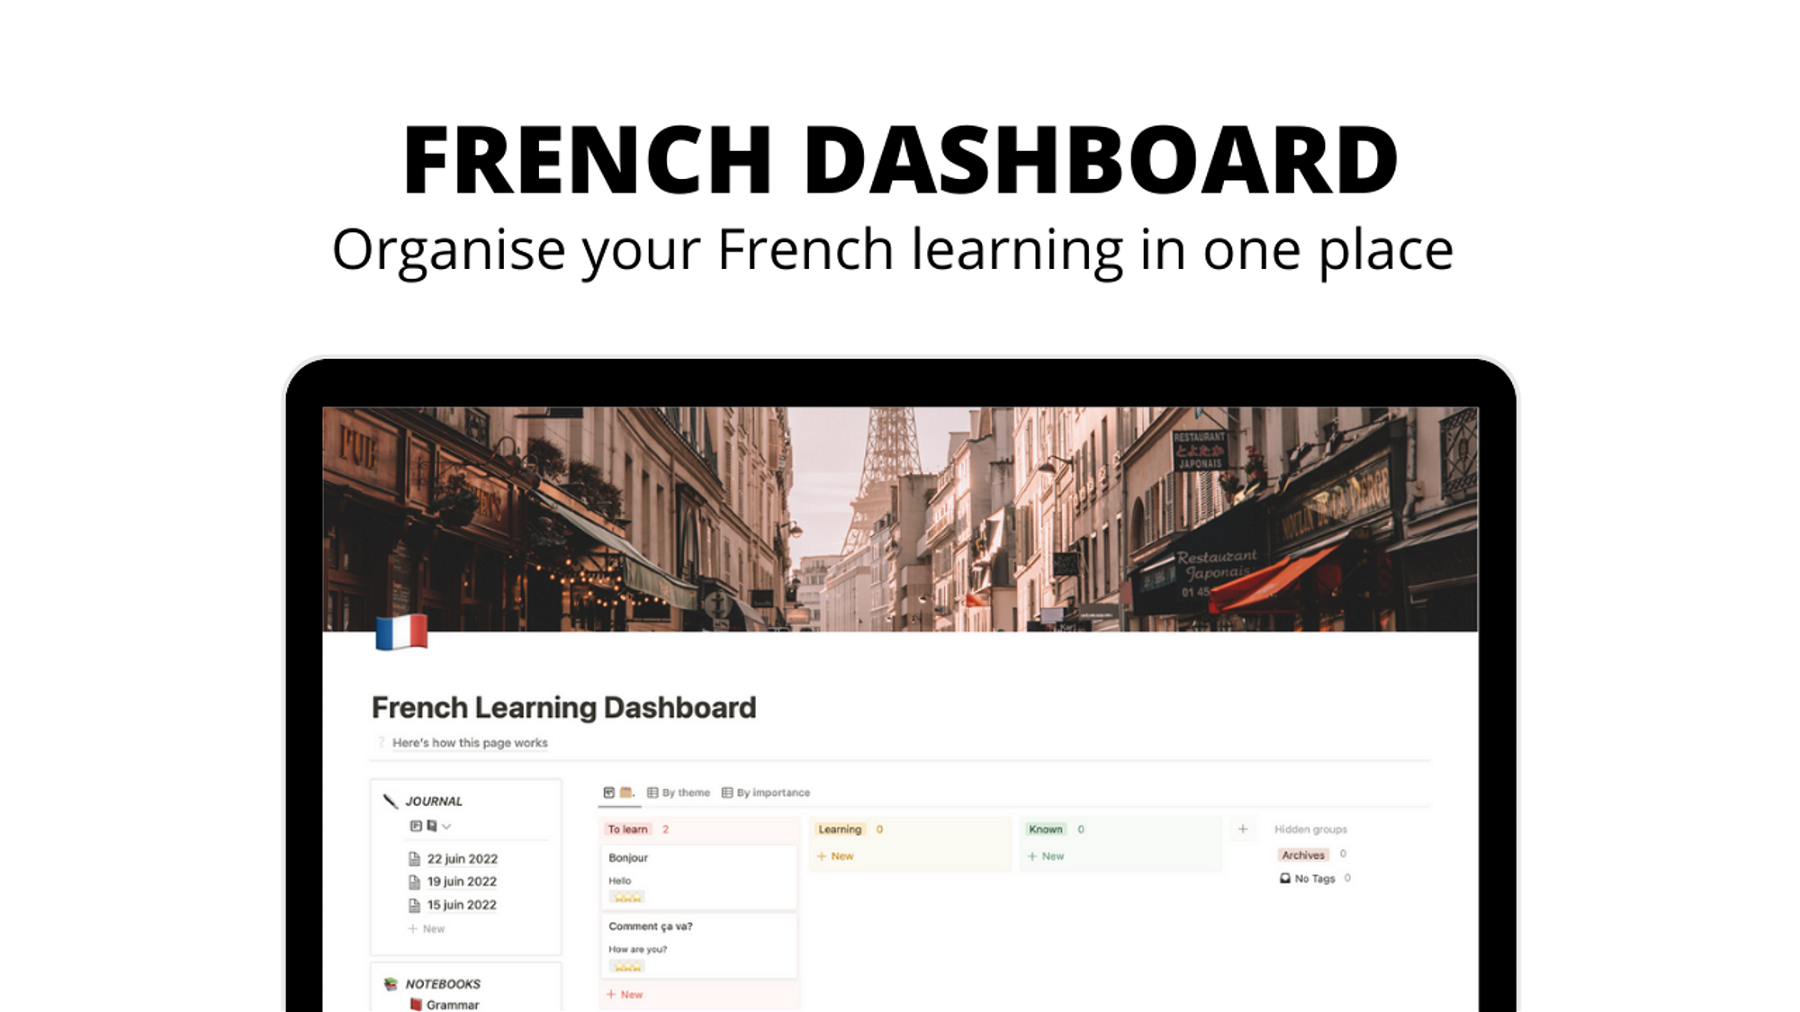 FRENCH DASHBOARD ðŸ‡«ðŸ‡· - A single page dashboard to learn French (complete with a flashcard system, journal practice and notebooks)